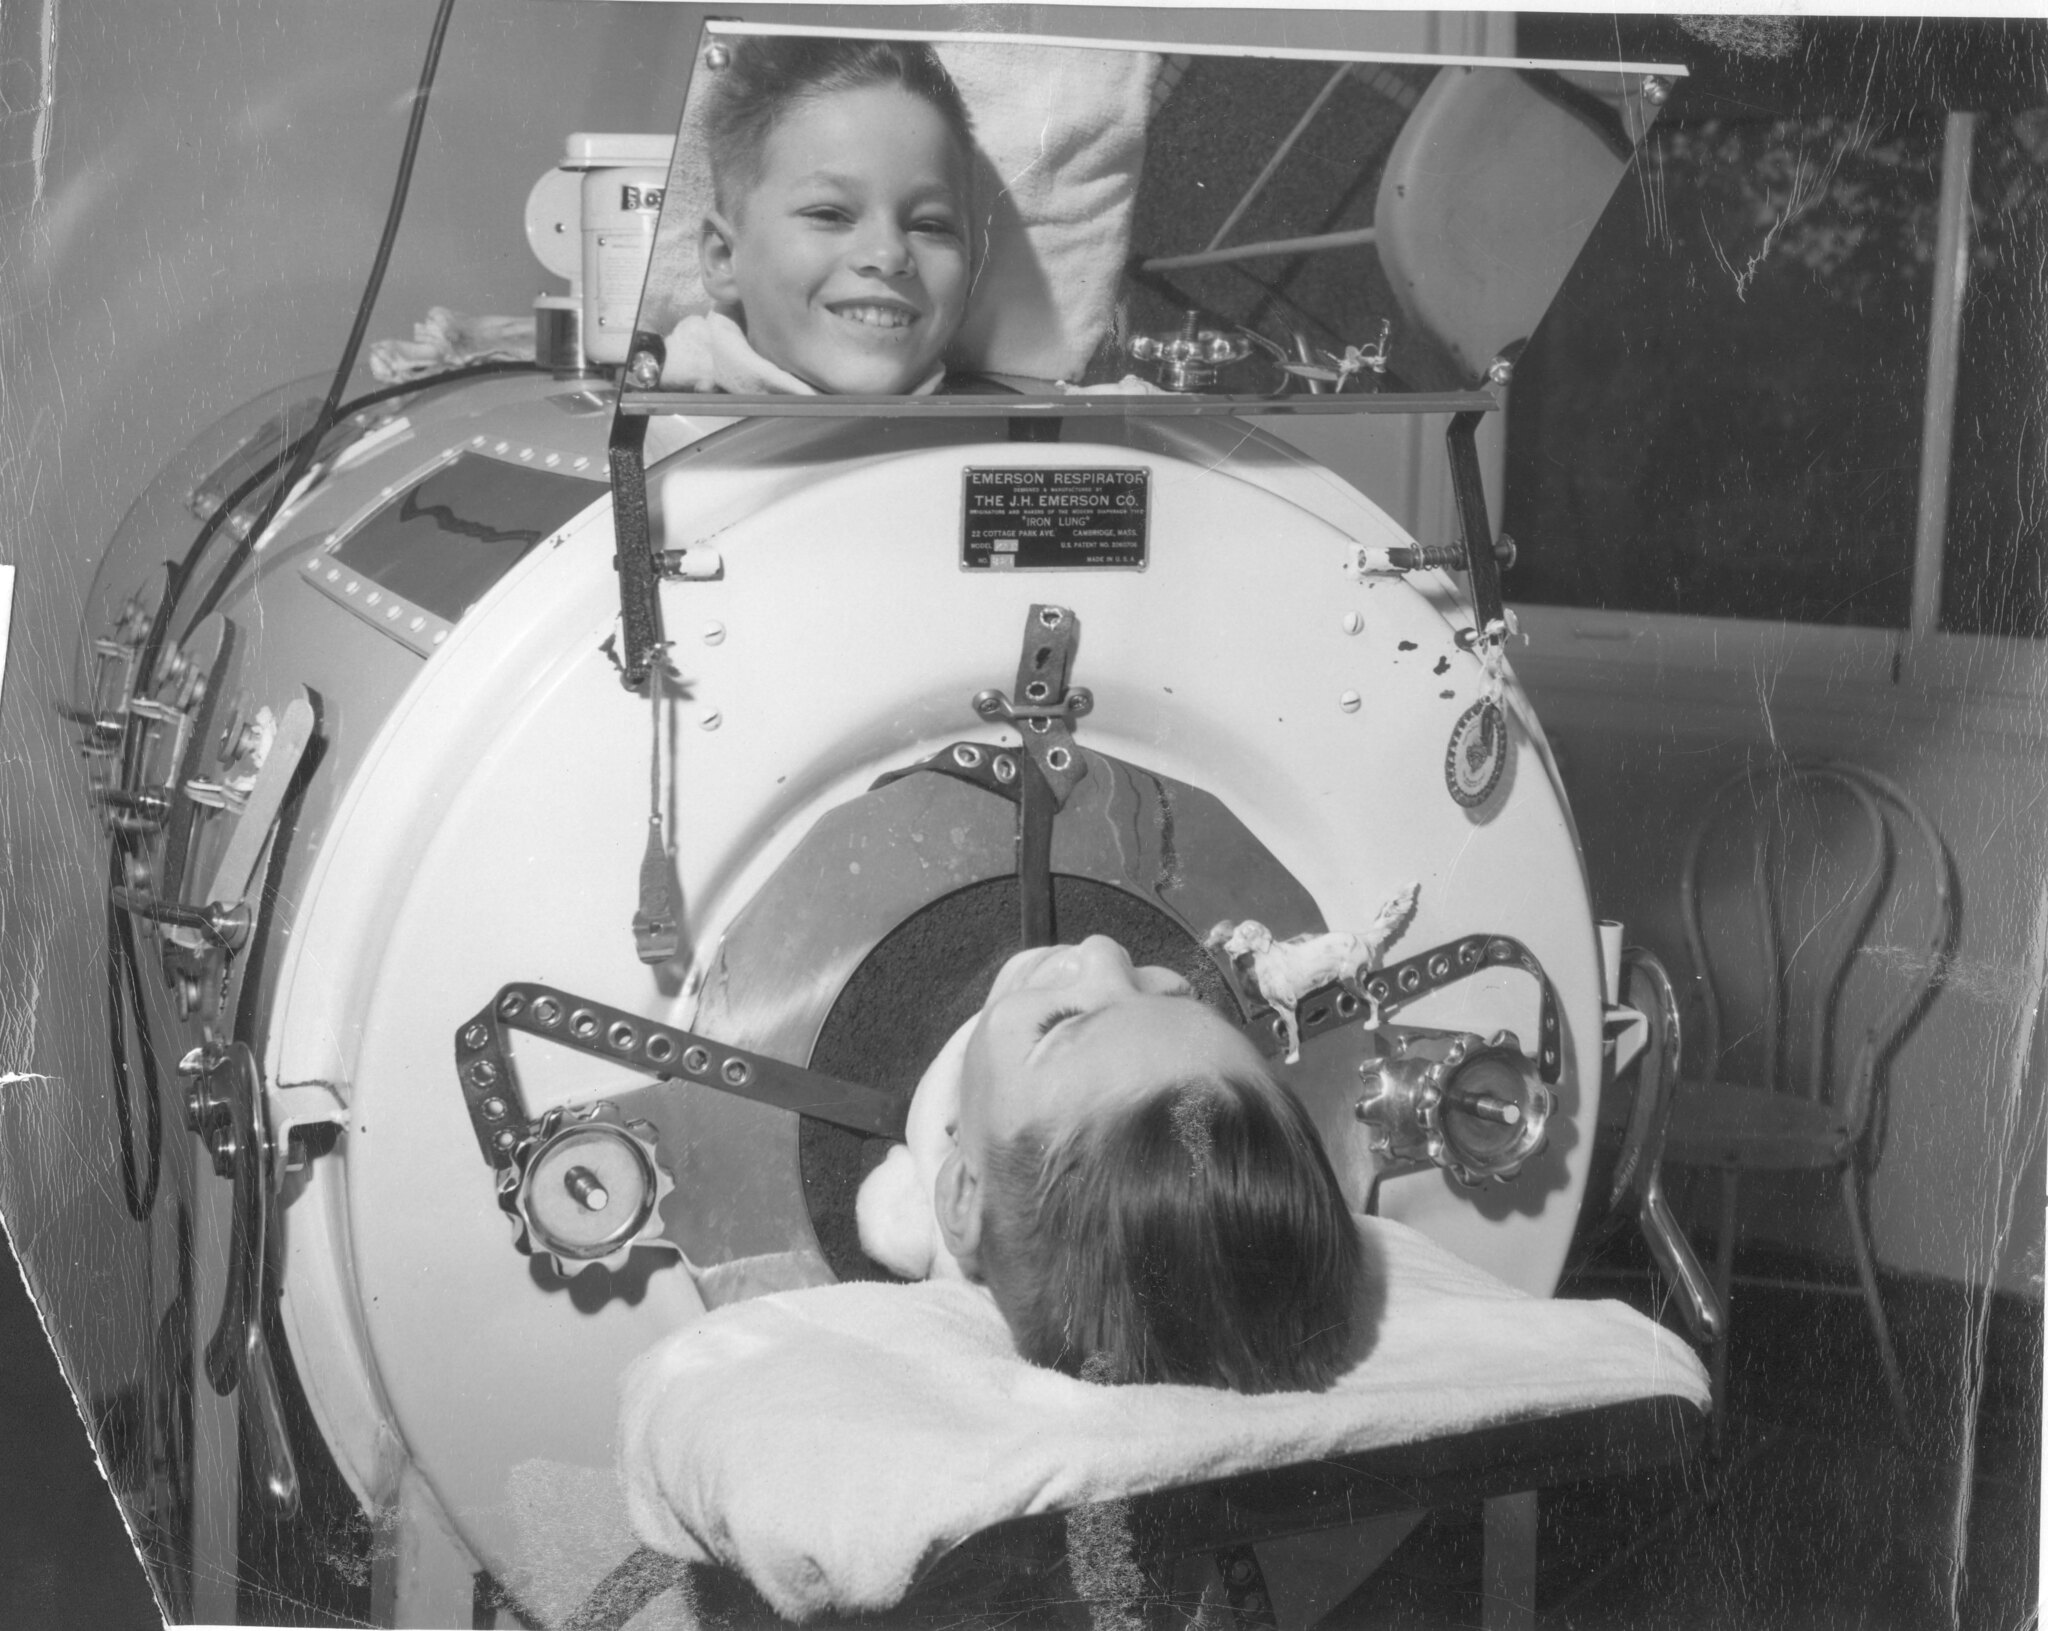 “Boy in Emerson Respirator (Iron Lung)” © Otis Historical Archives National Museum of Health and Medicine; photograph by Joe Clark; Creative Commons license